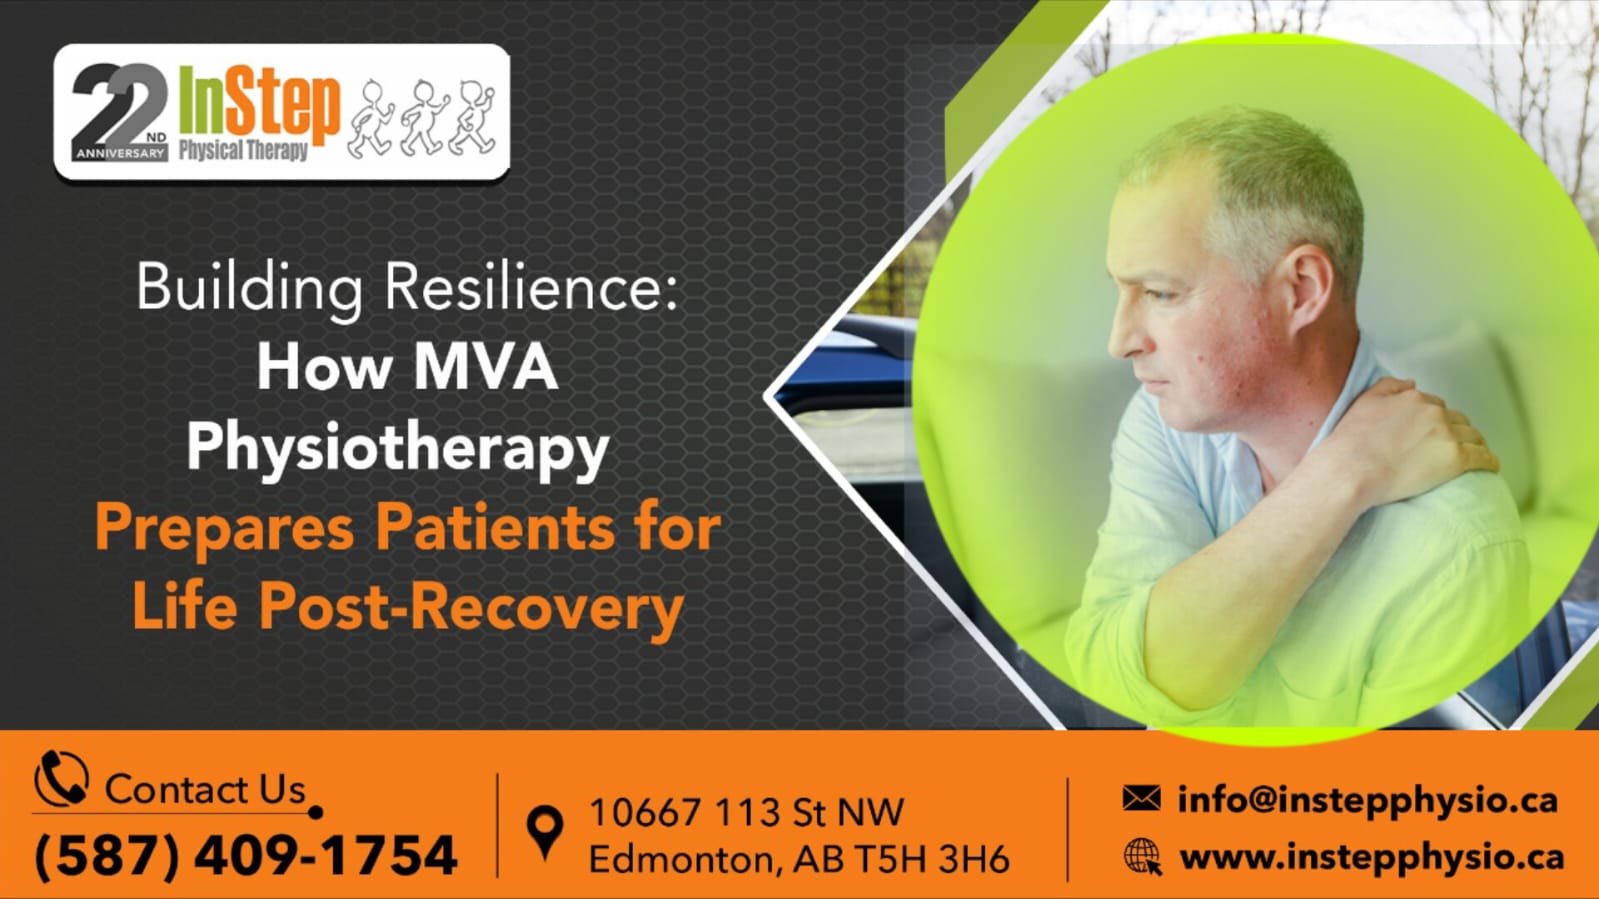 Building Resilience: How MVA Physiotherapy Prepares Patients for Life Post-Recovery